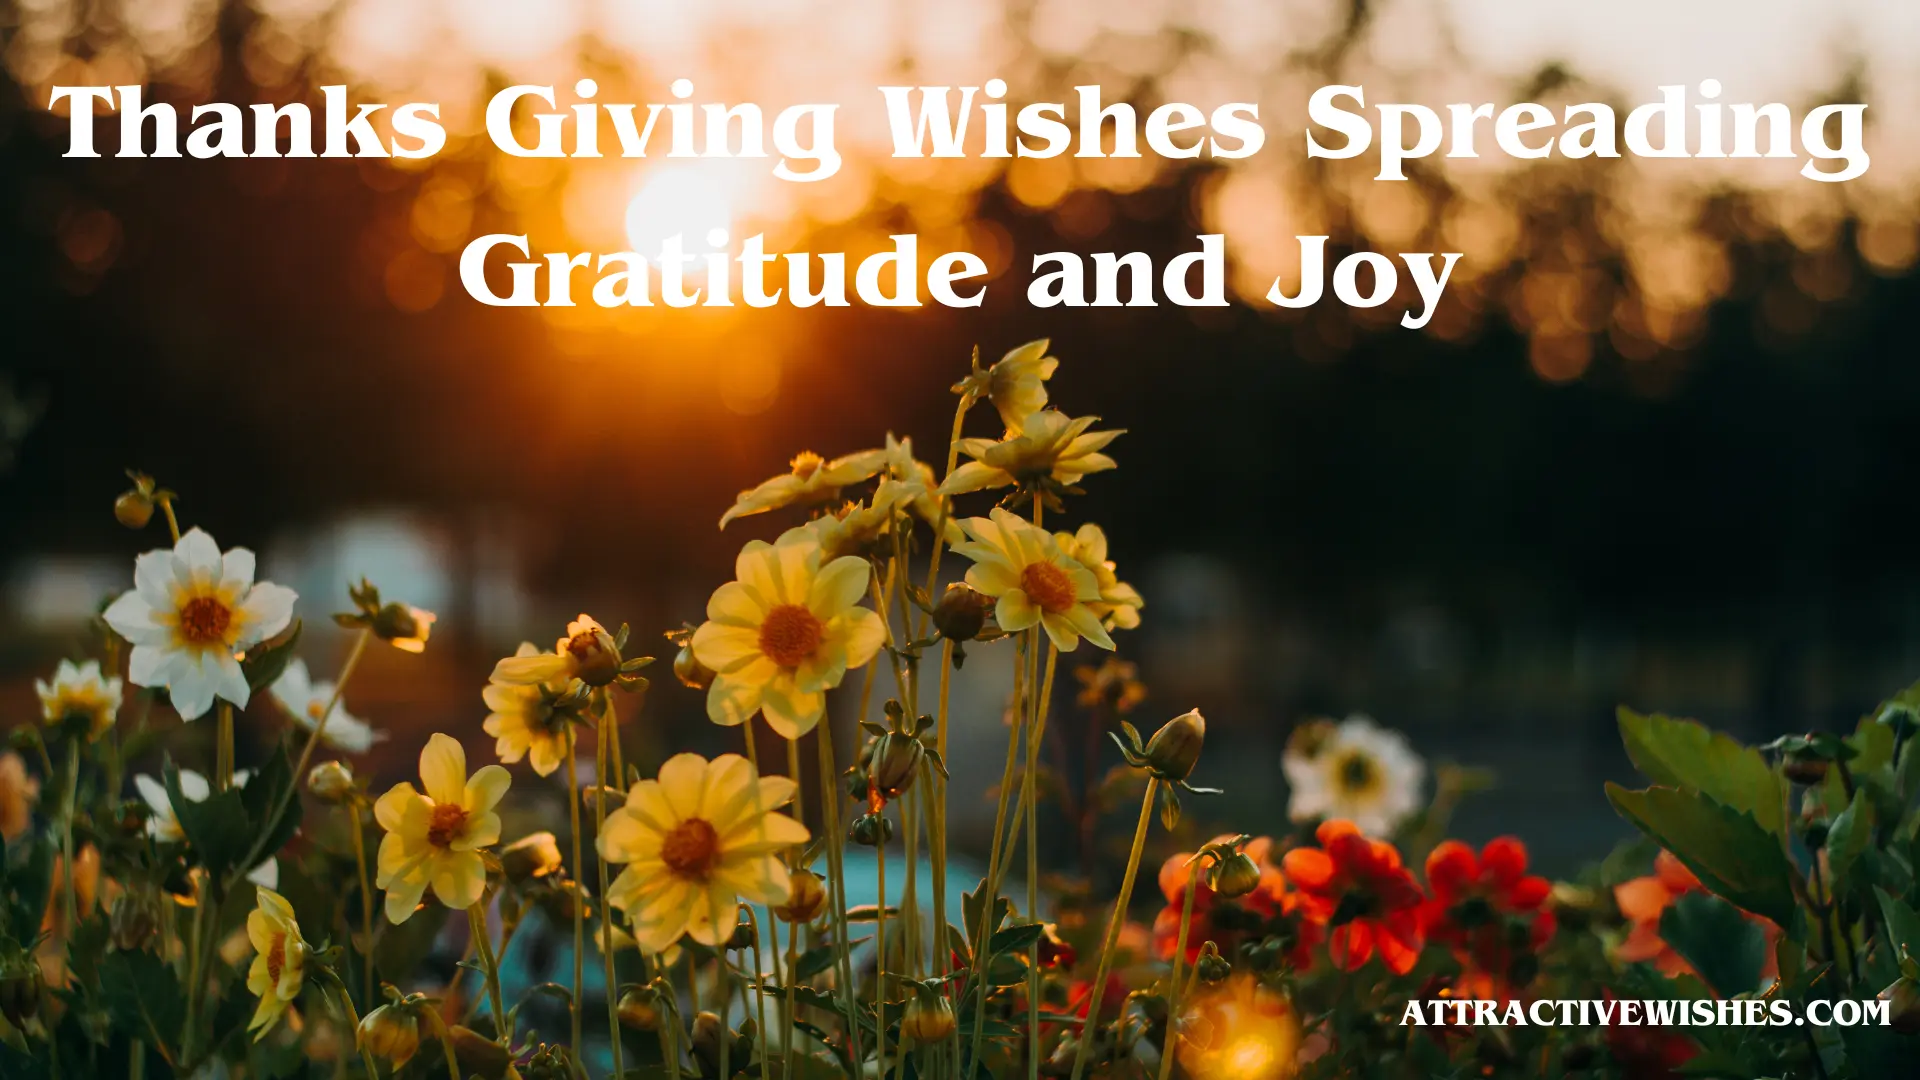 Thanks Giving Wishes Spreading Gratitude and Joy